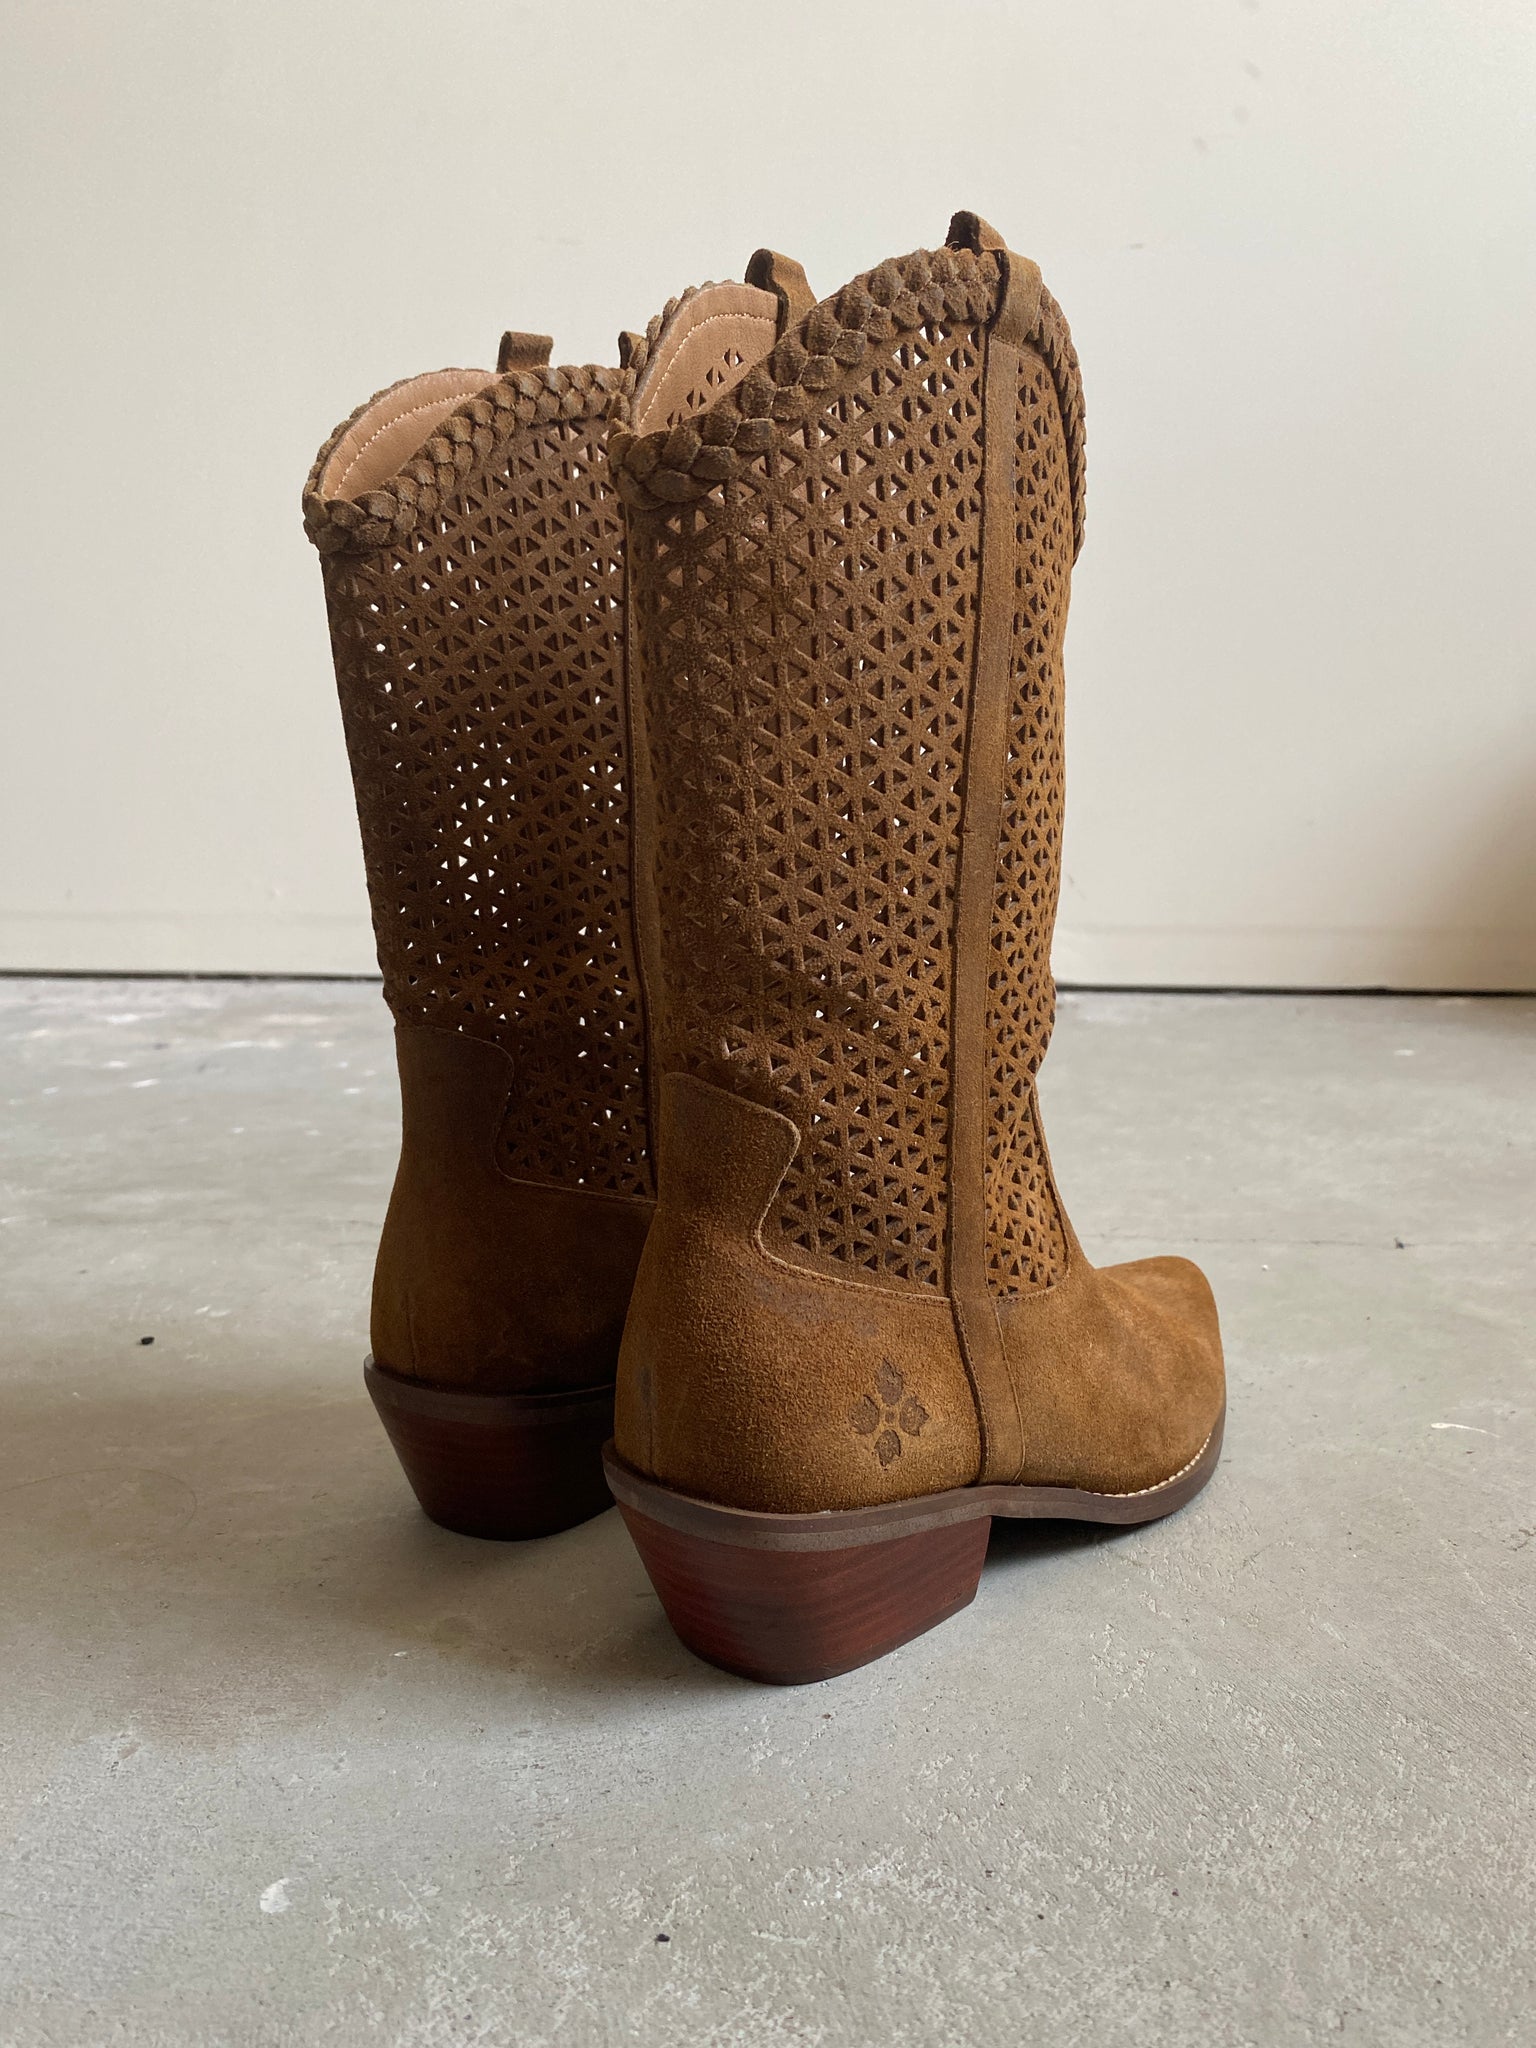 Patricia Nash Brown Suede Cowgirl Boots (U.S. Women 9)